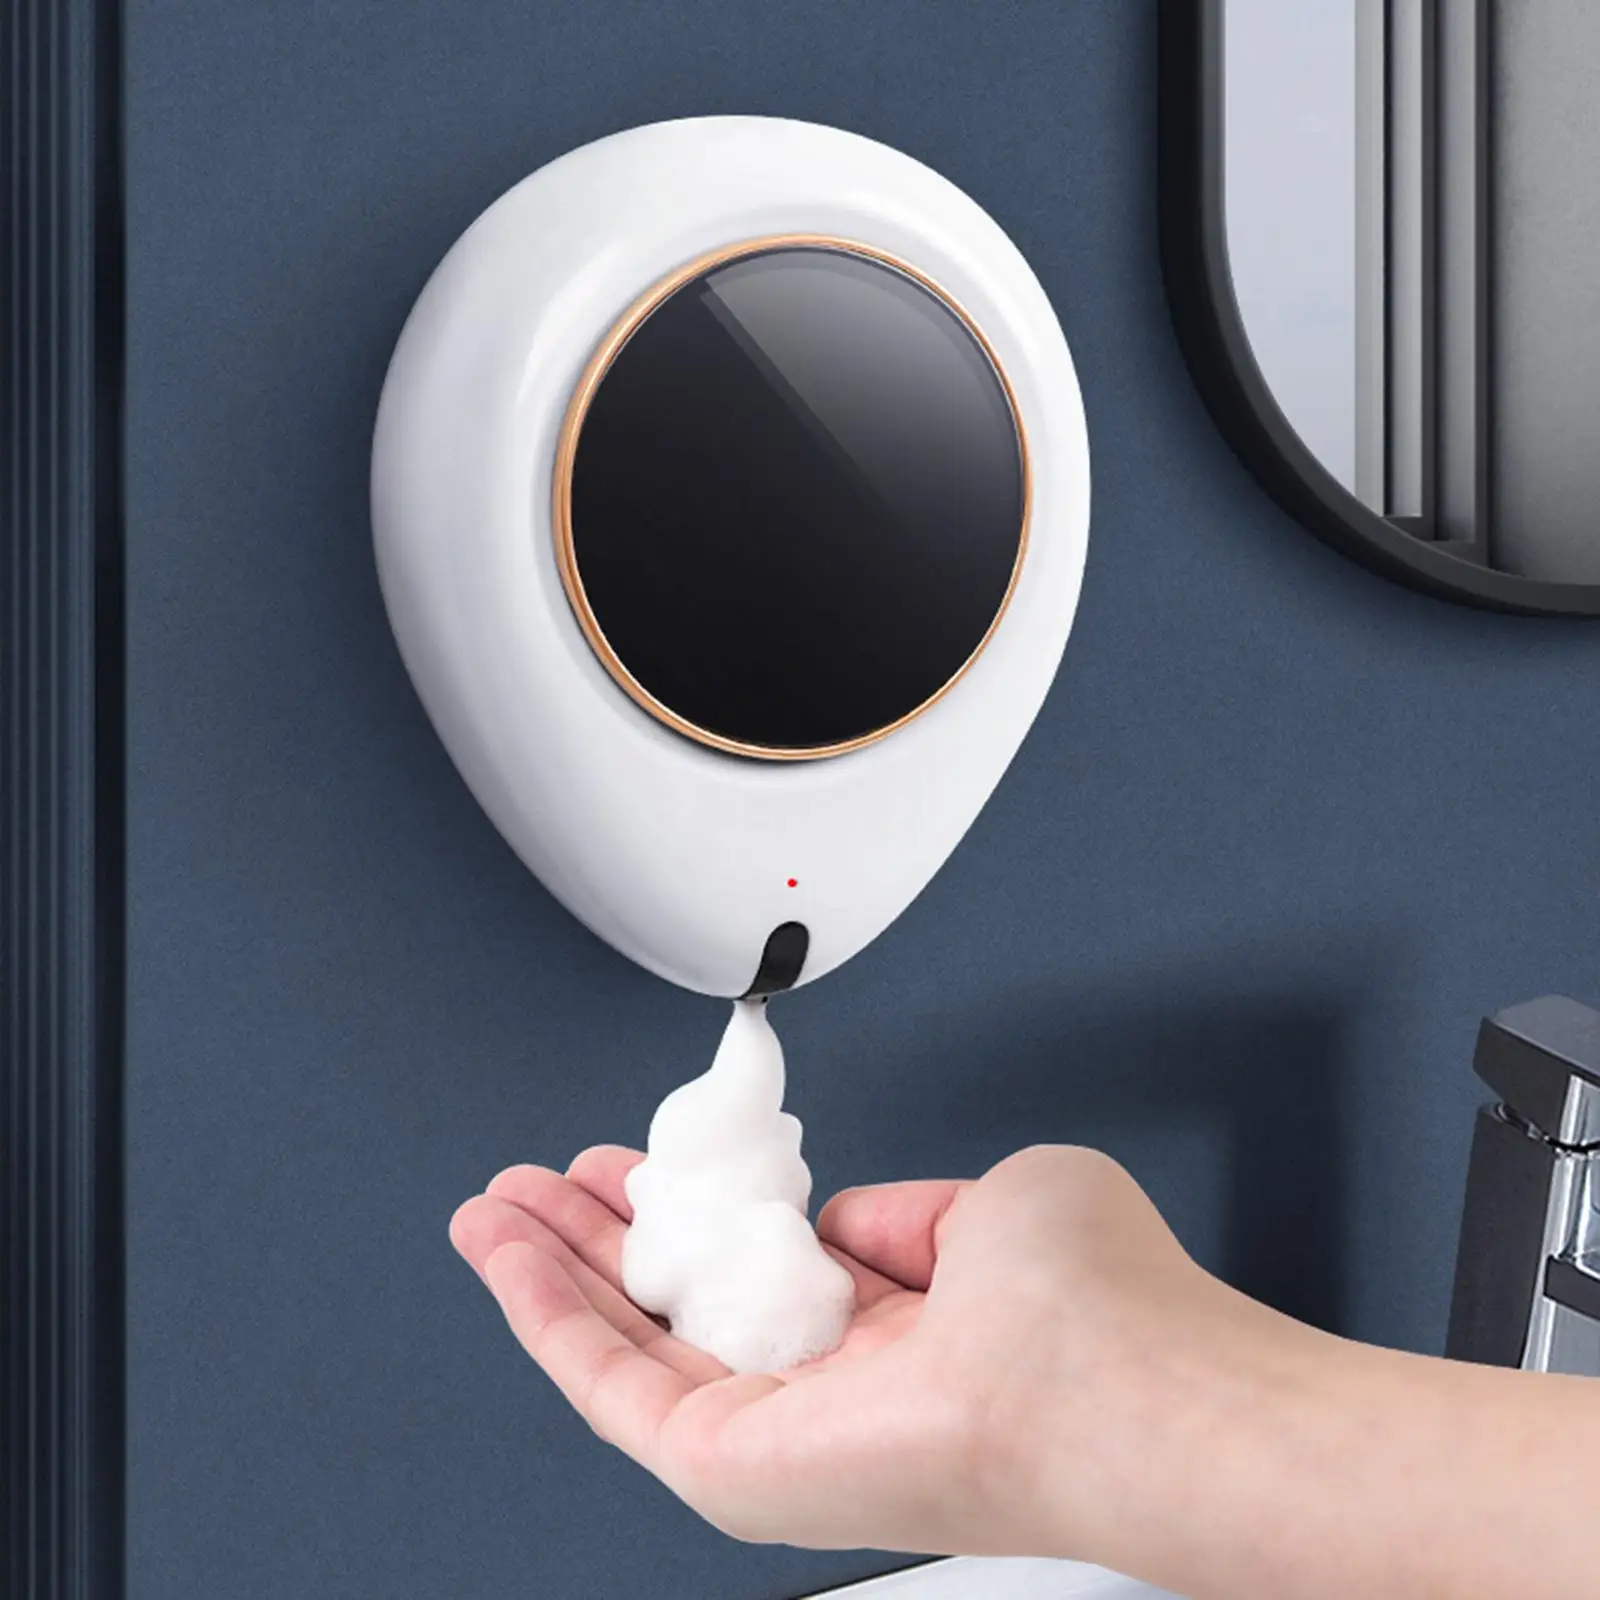 Automatic Soap Dispenser Battery Powered 300ml Touch Free Wall Mount Dispenser for Hotel School Bathroom Home